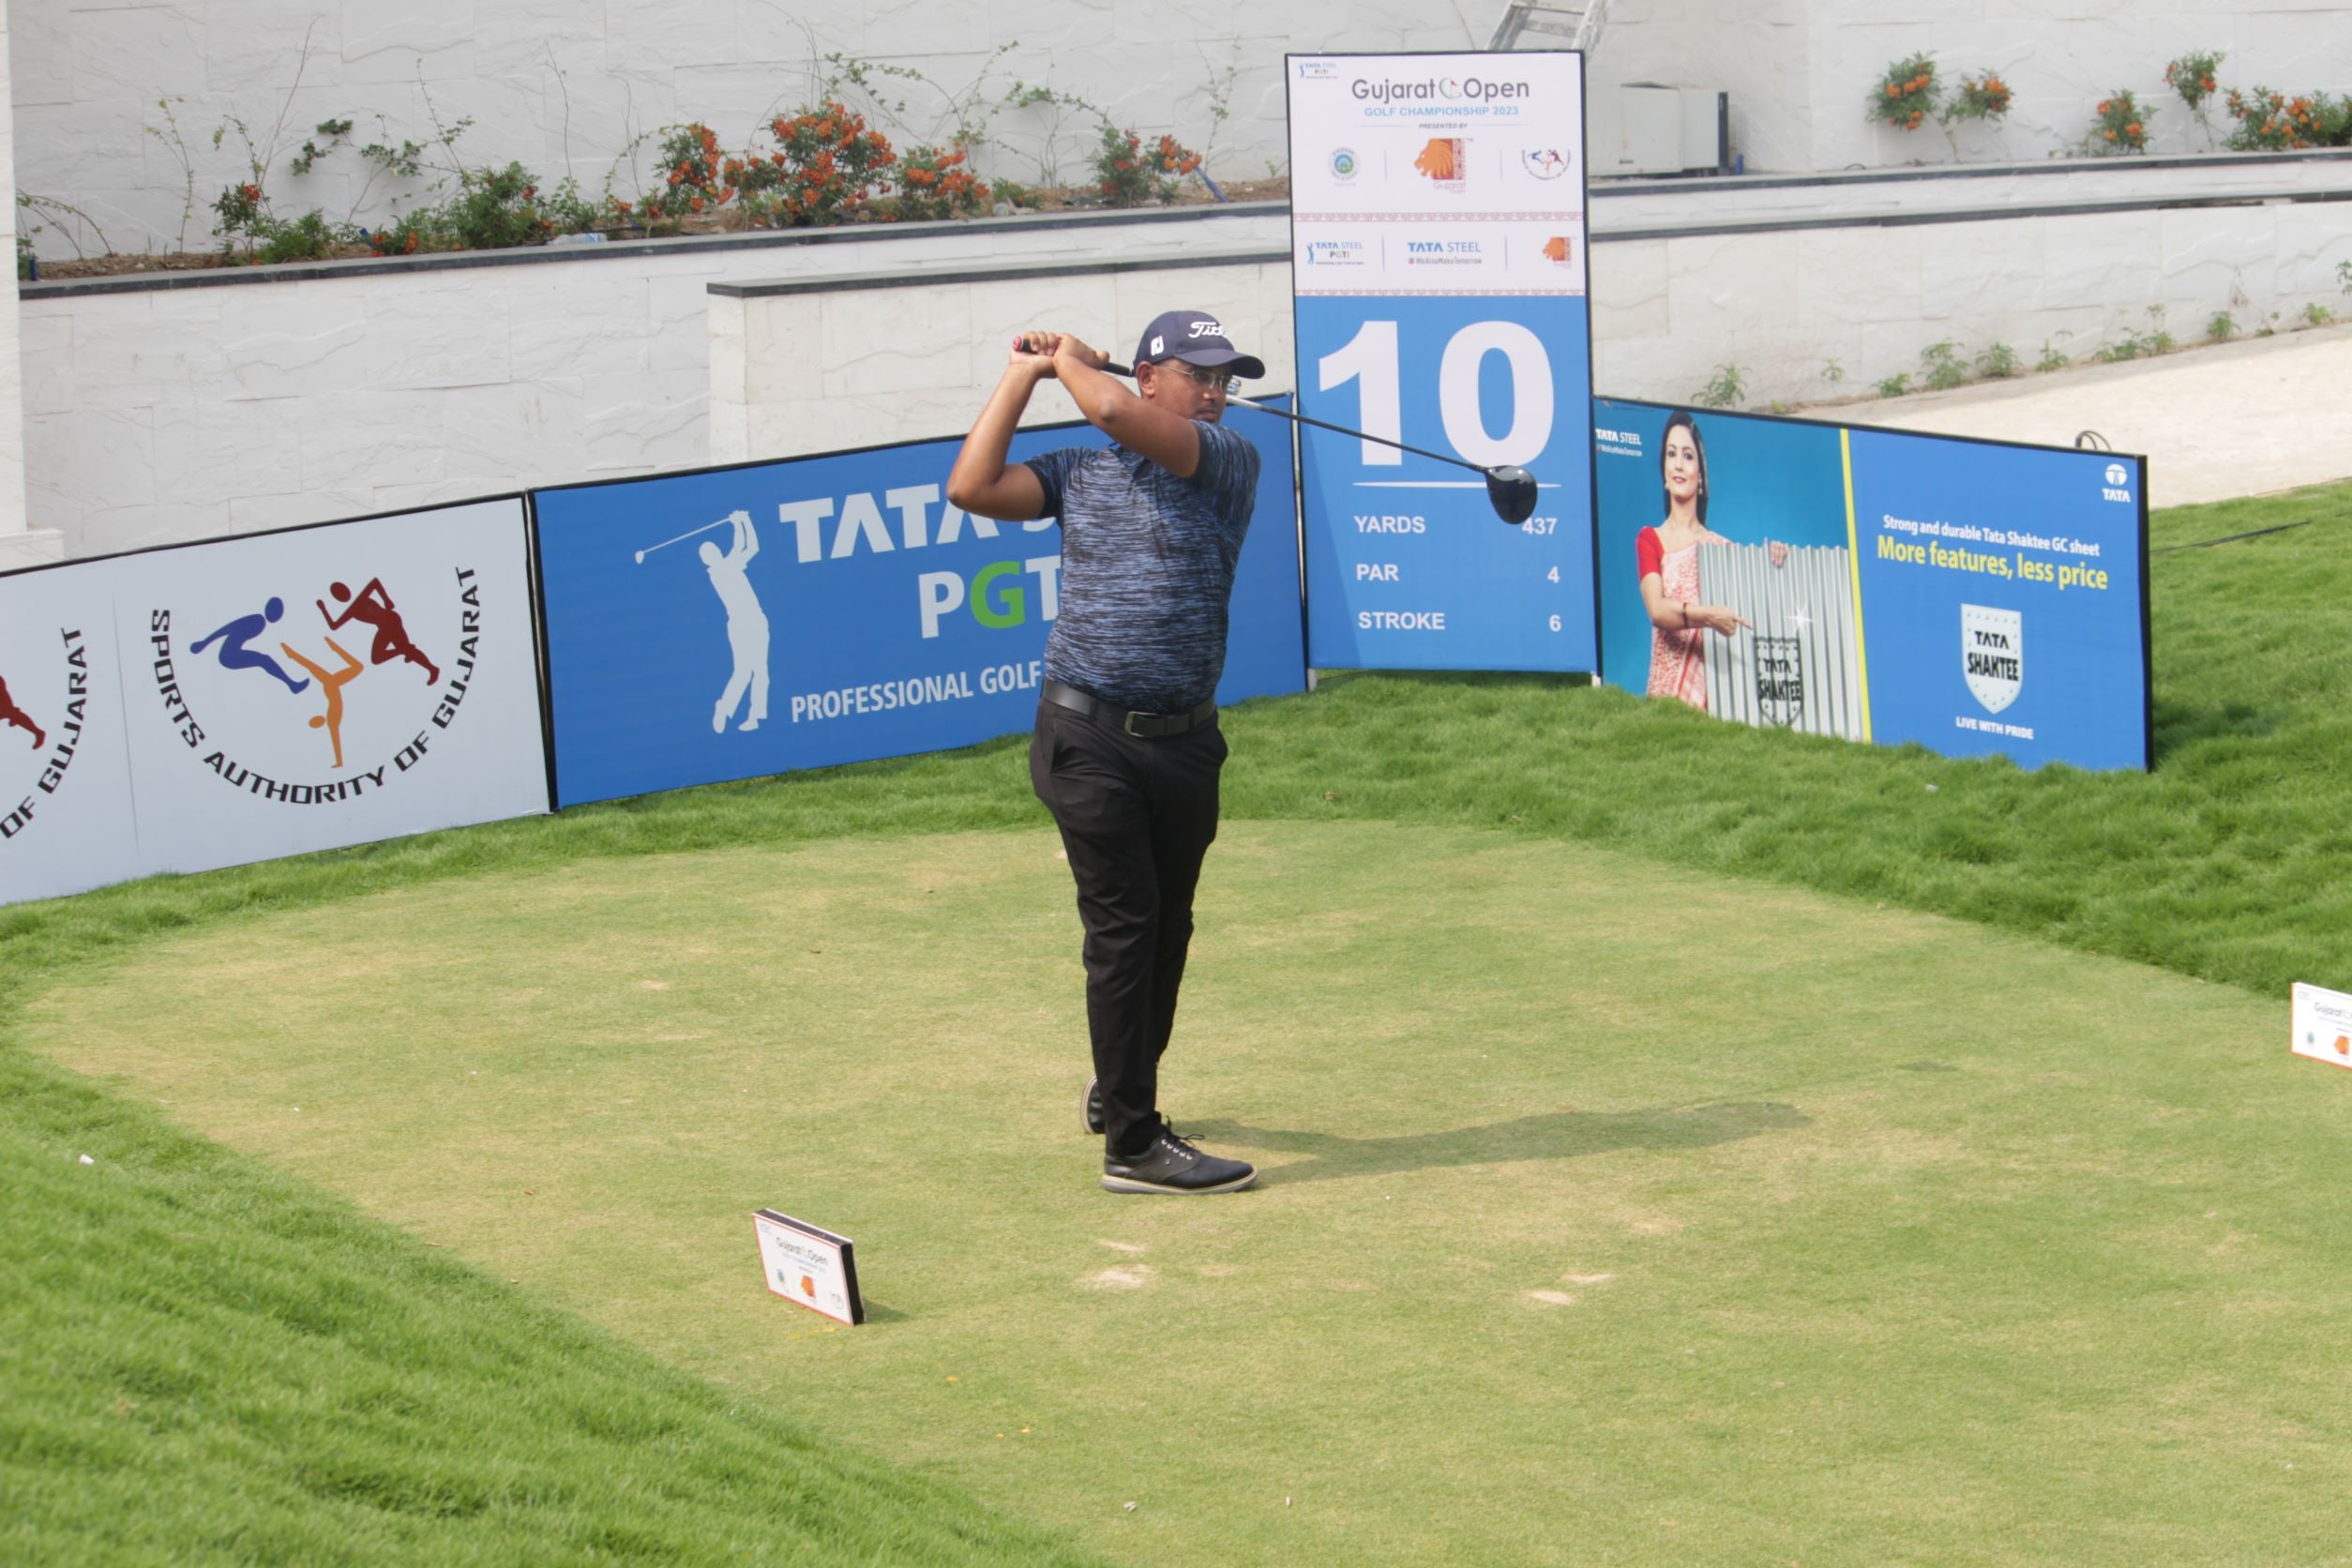 Local favourite Anshul Patel shoots 67, rises into joint lead with Aman Raj on day three